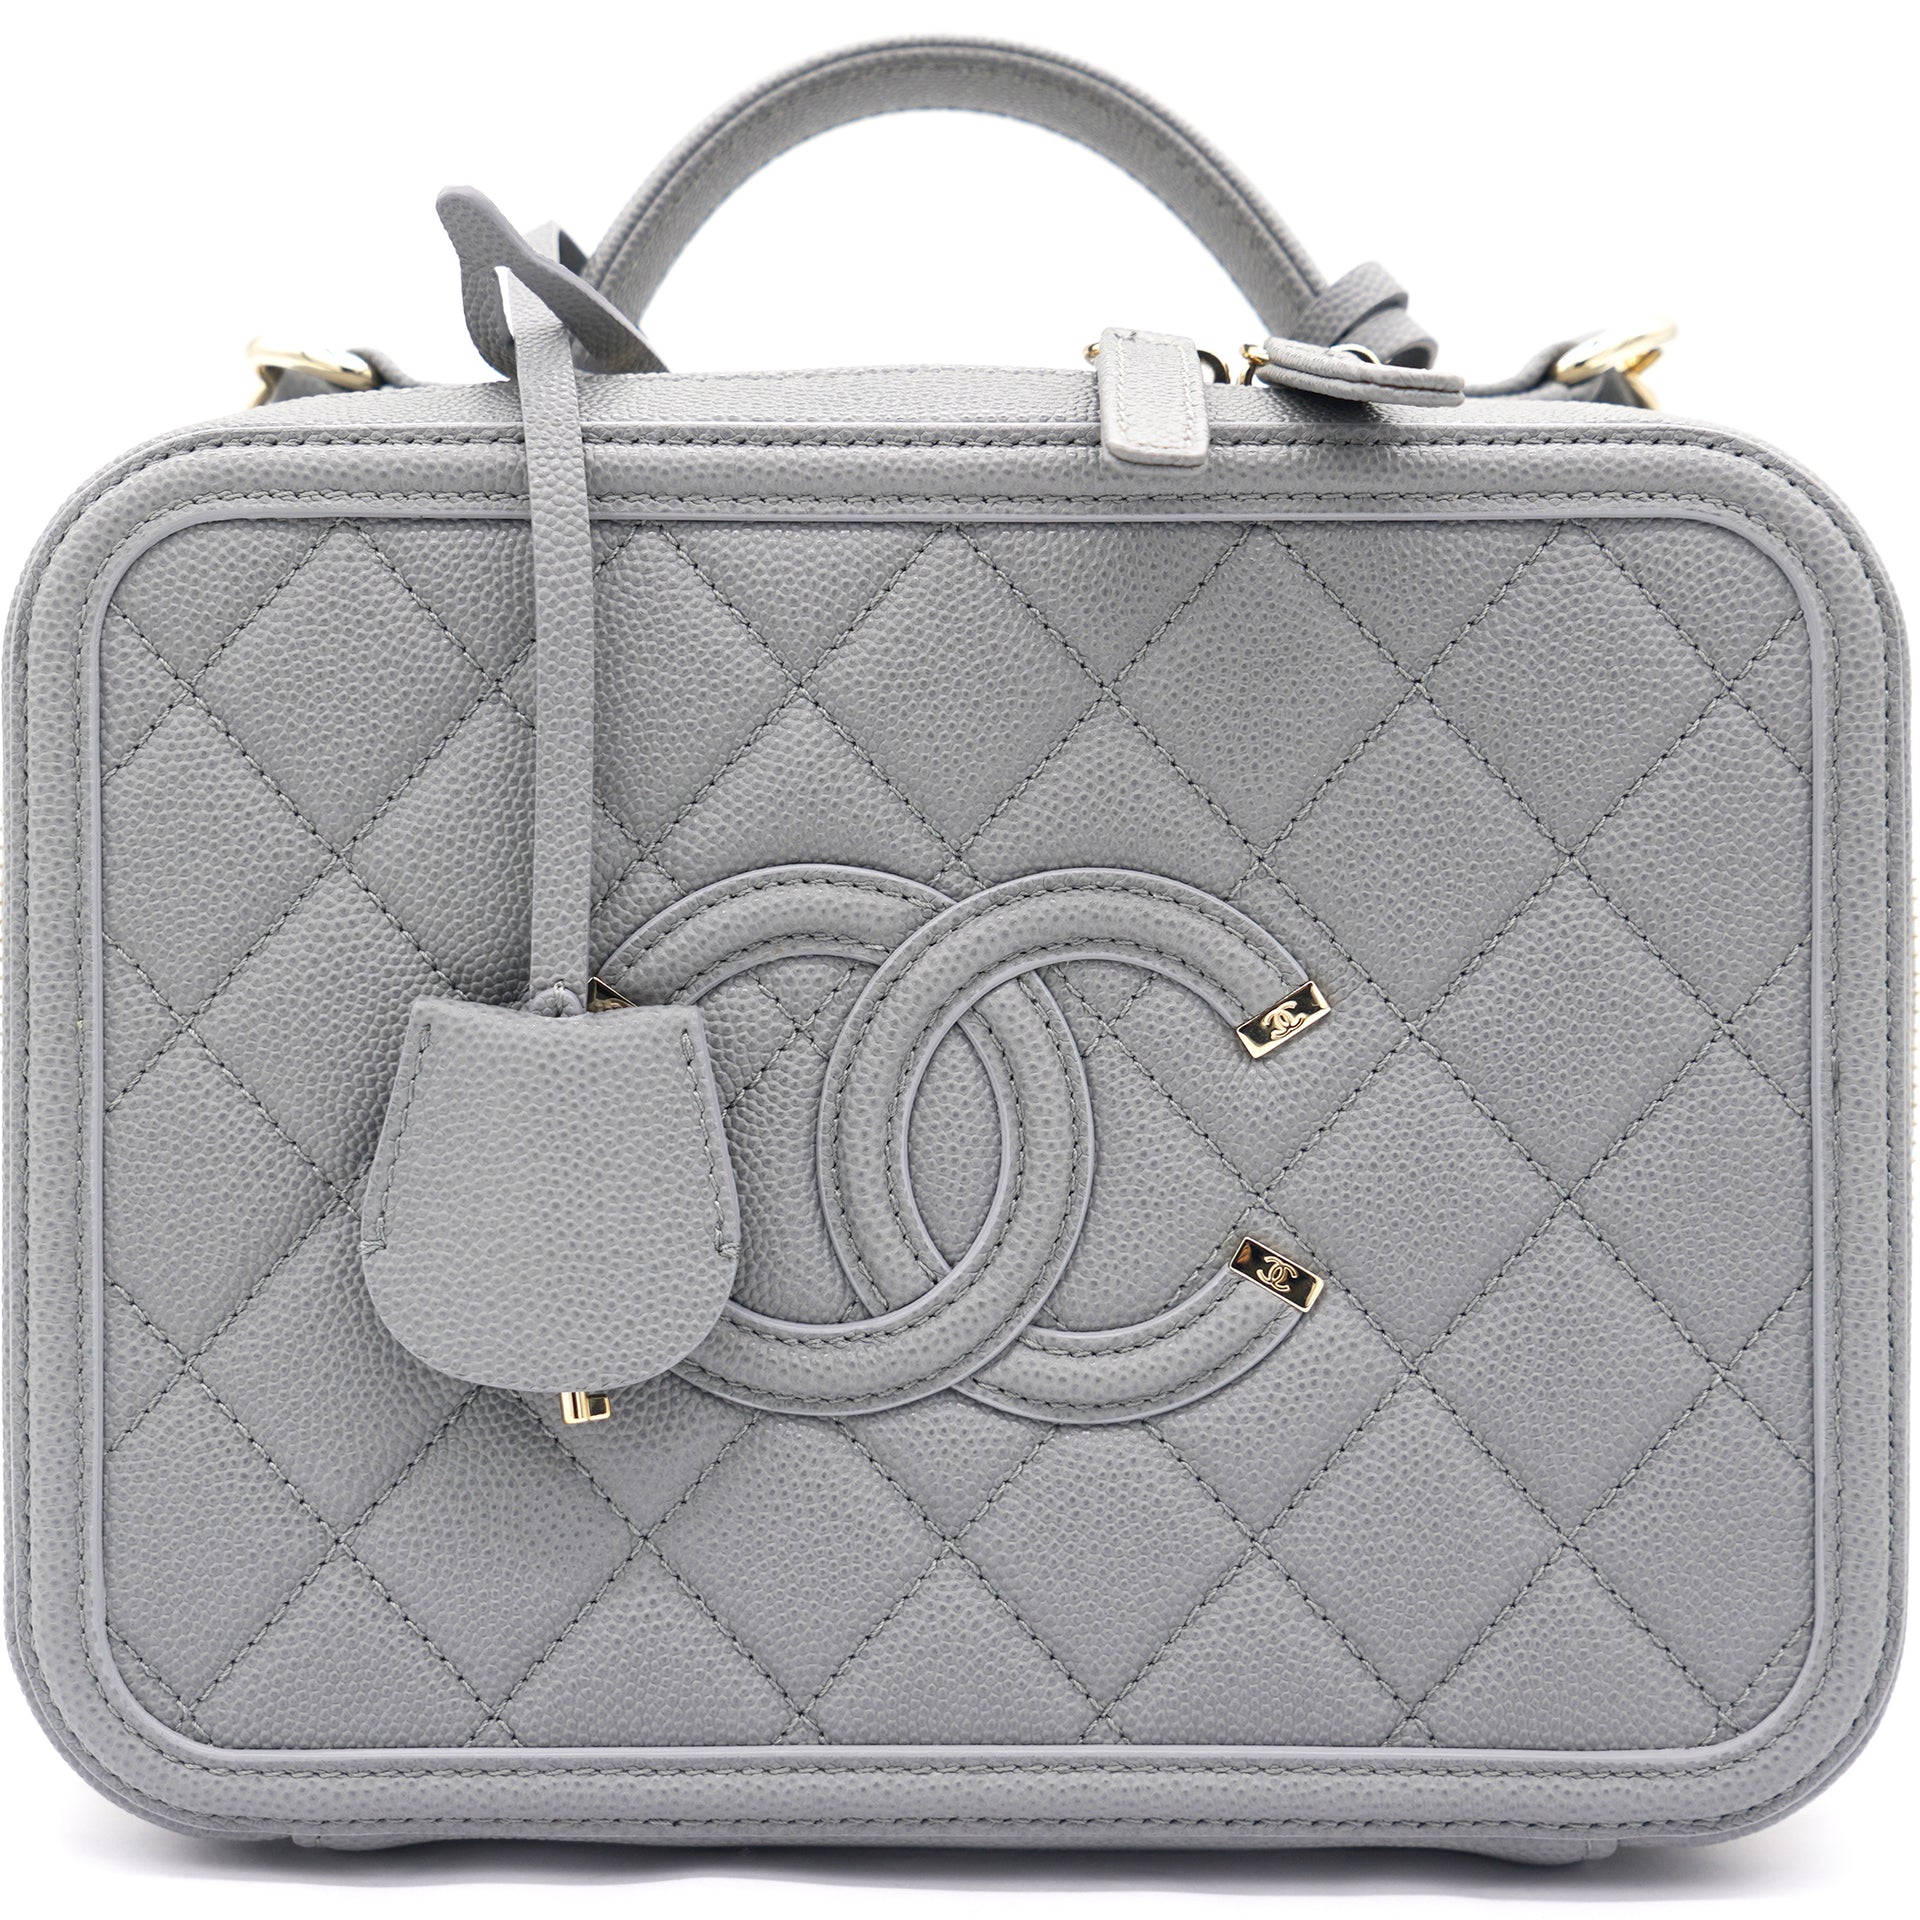 Complete Review of the Chanel Vanity Bag